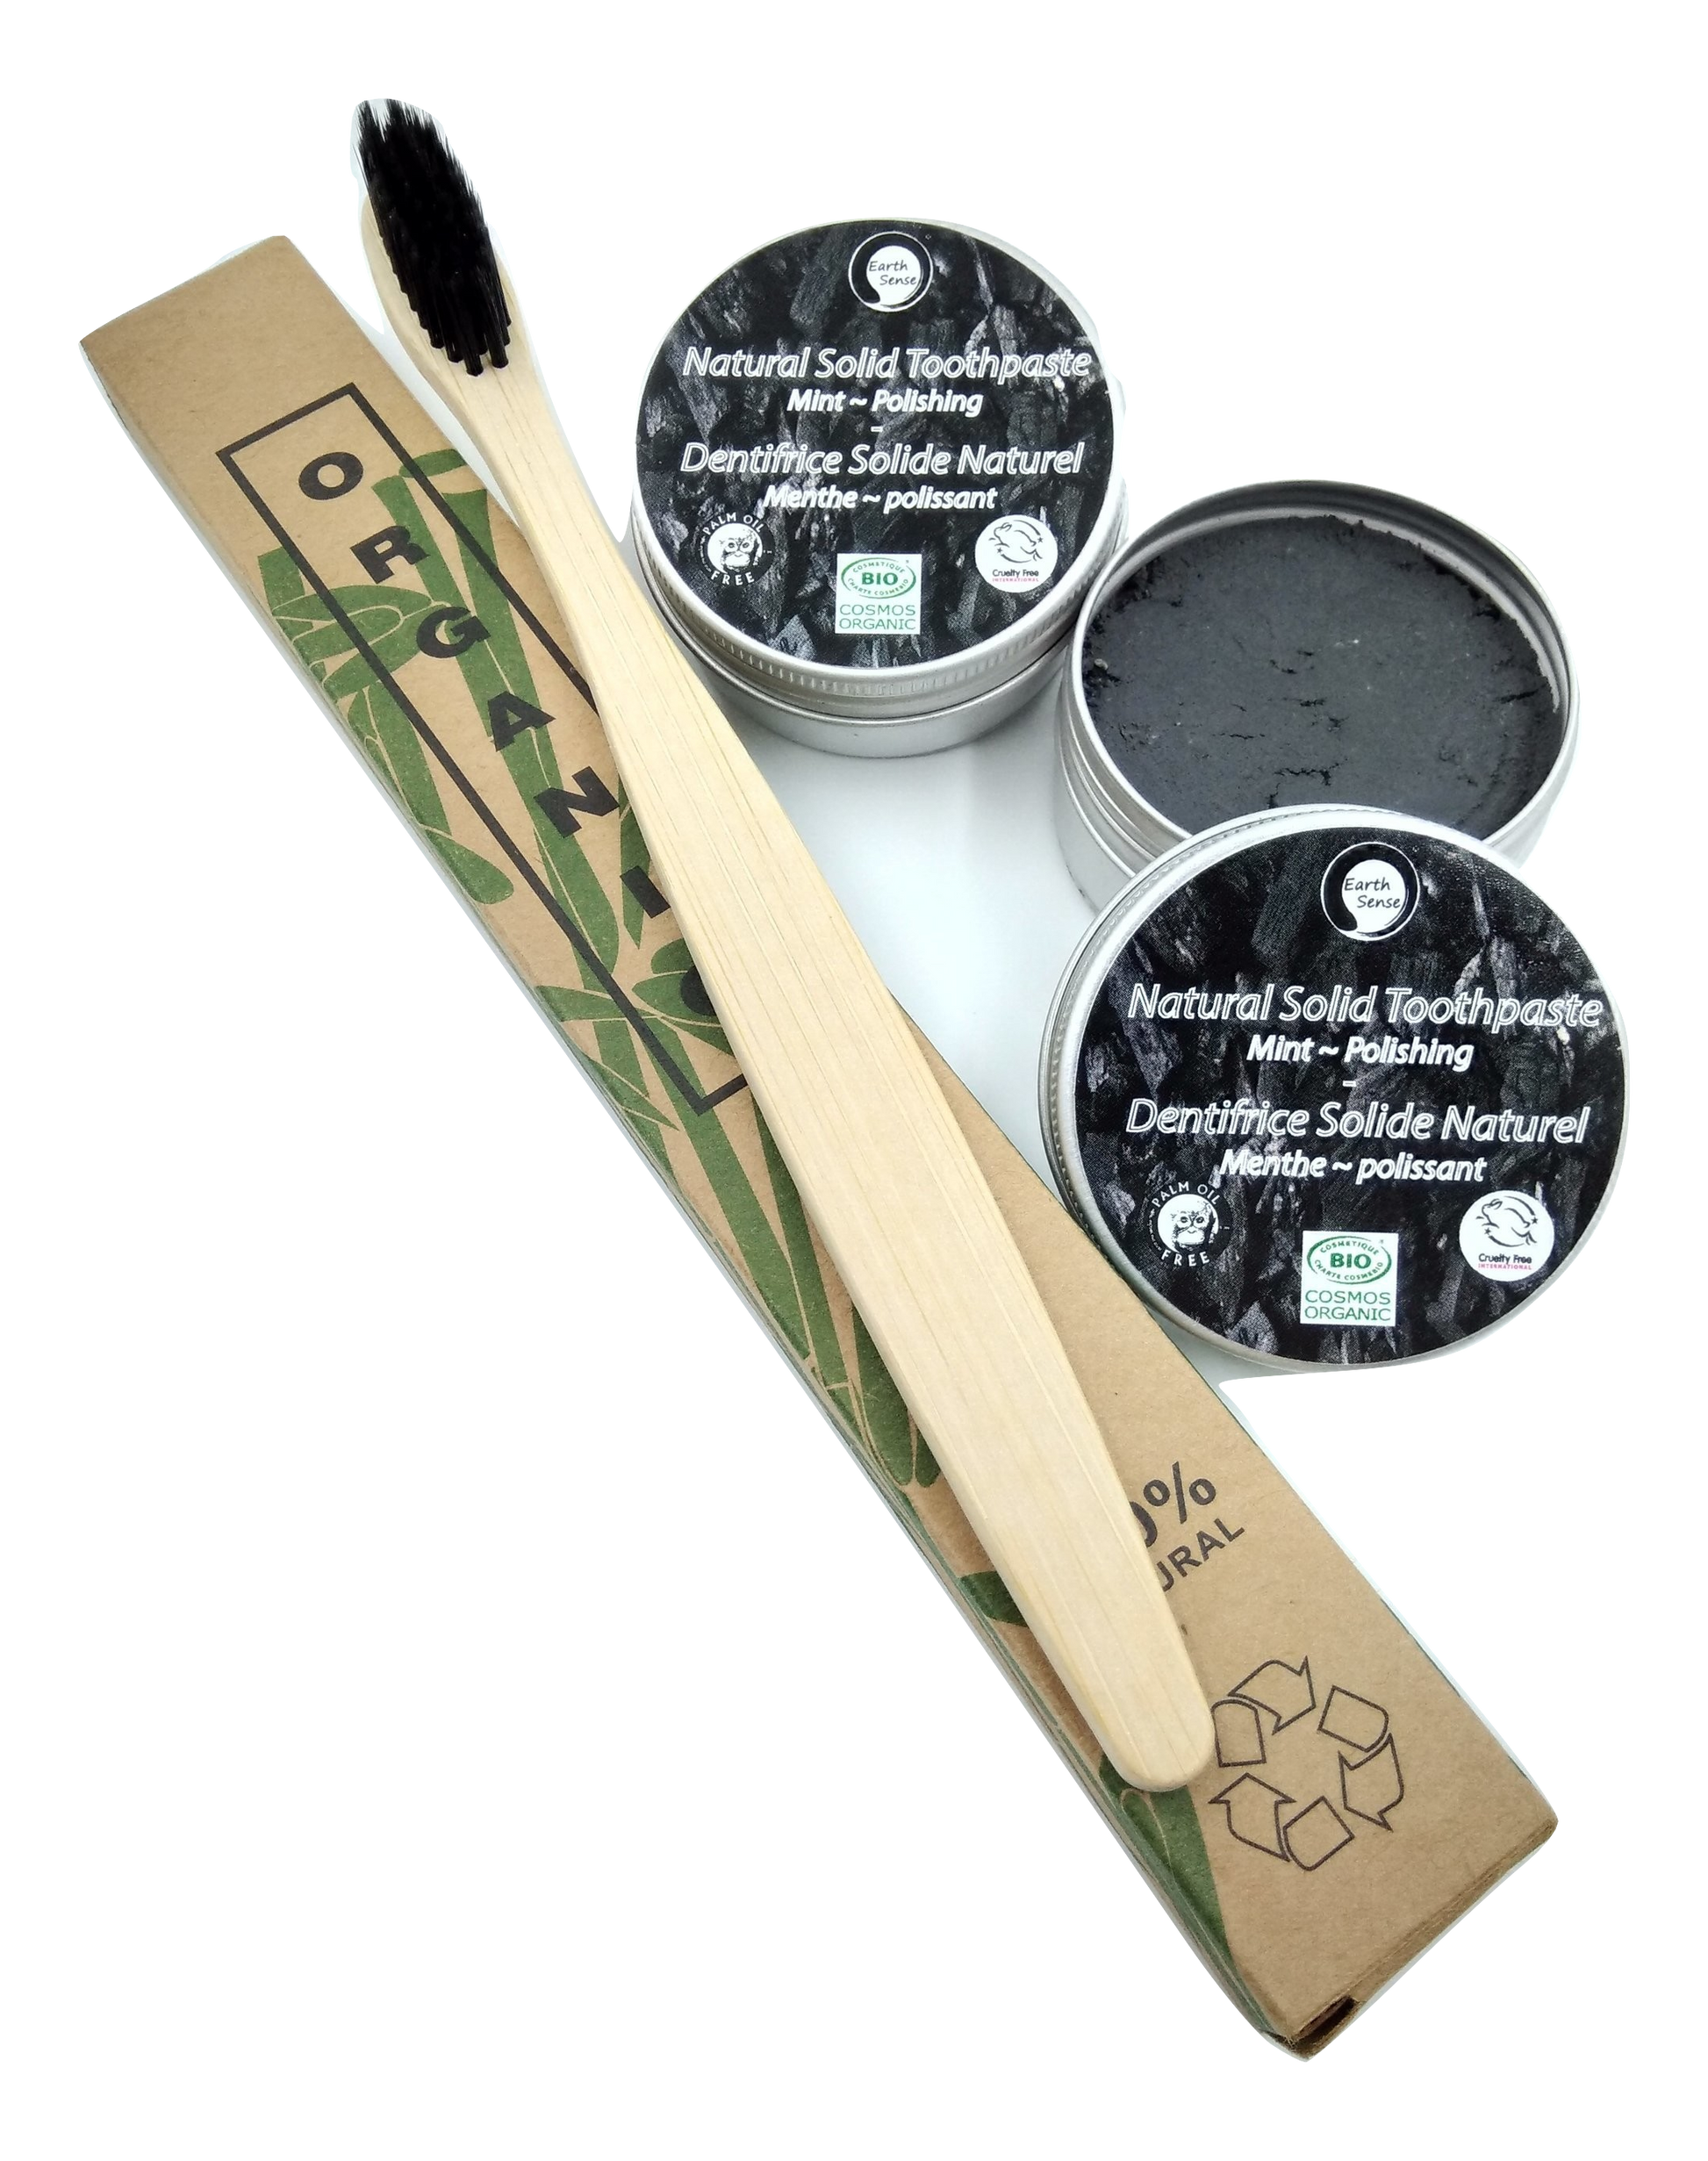 MEGA BUNDLE - 32 x 40g Natural Organic Certified Solid Toothpaste - 16 of each type - 2 types - Earthsenseorganics